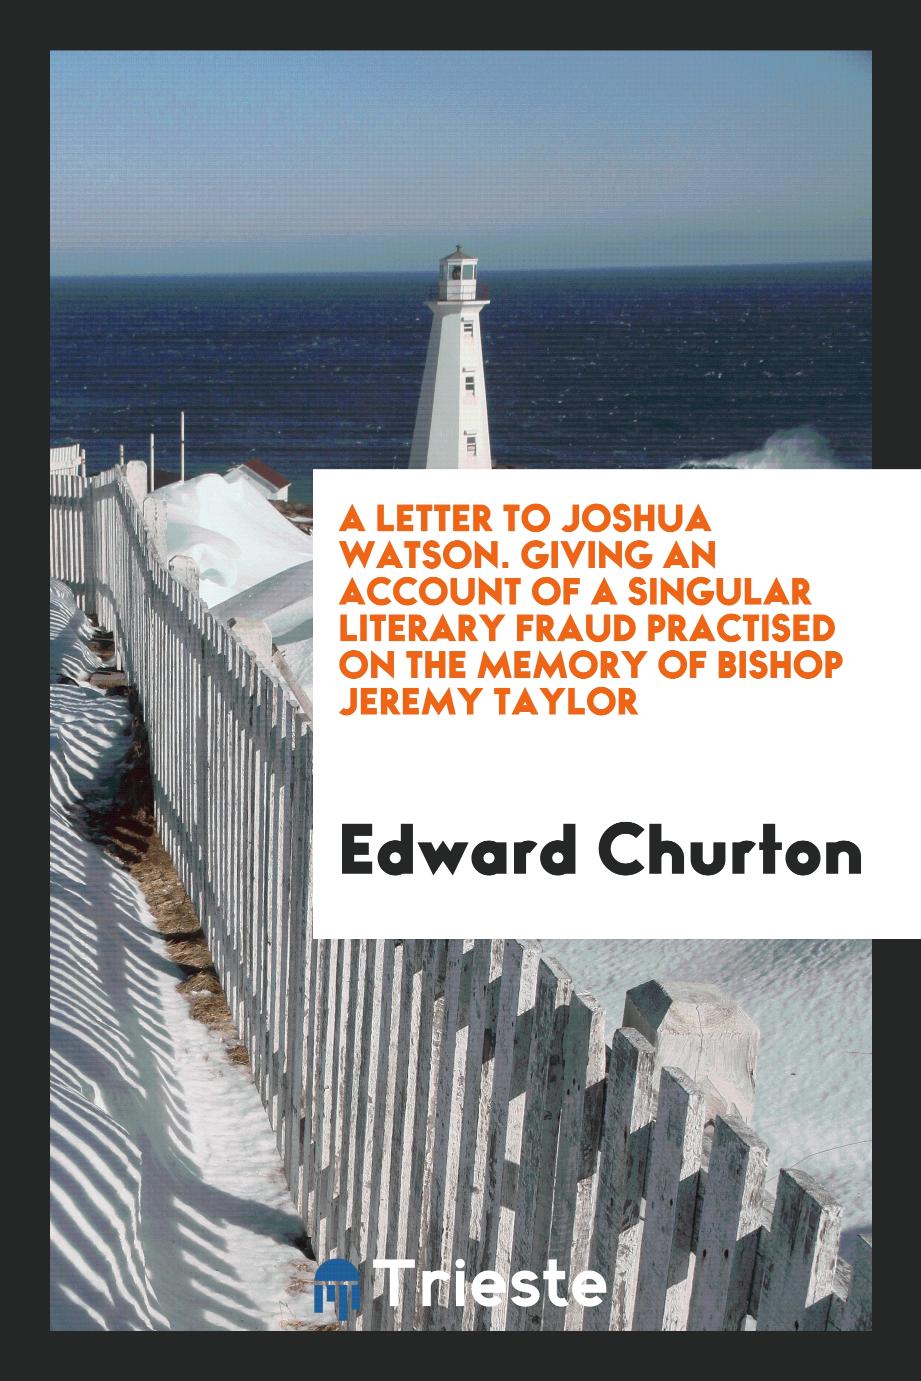 A Letter to Joshua Watson. Giving an Account of a Singular Literary Fraud Practised on the Memory of Bishop Jeremy Taylor